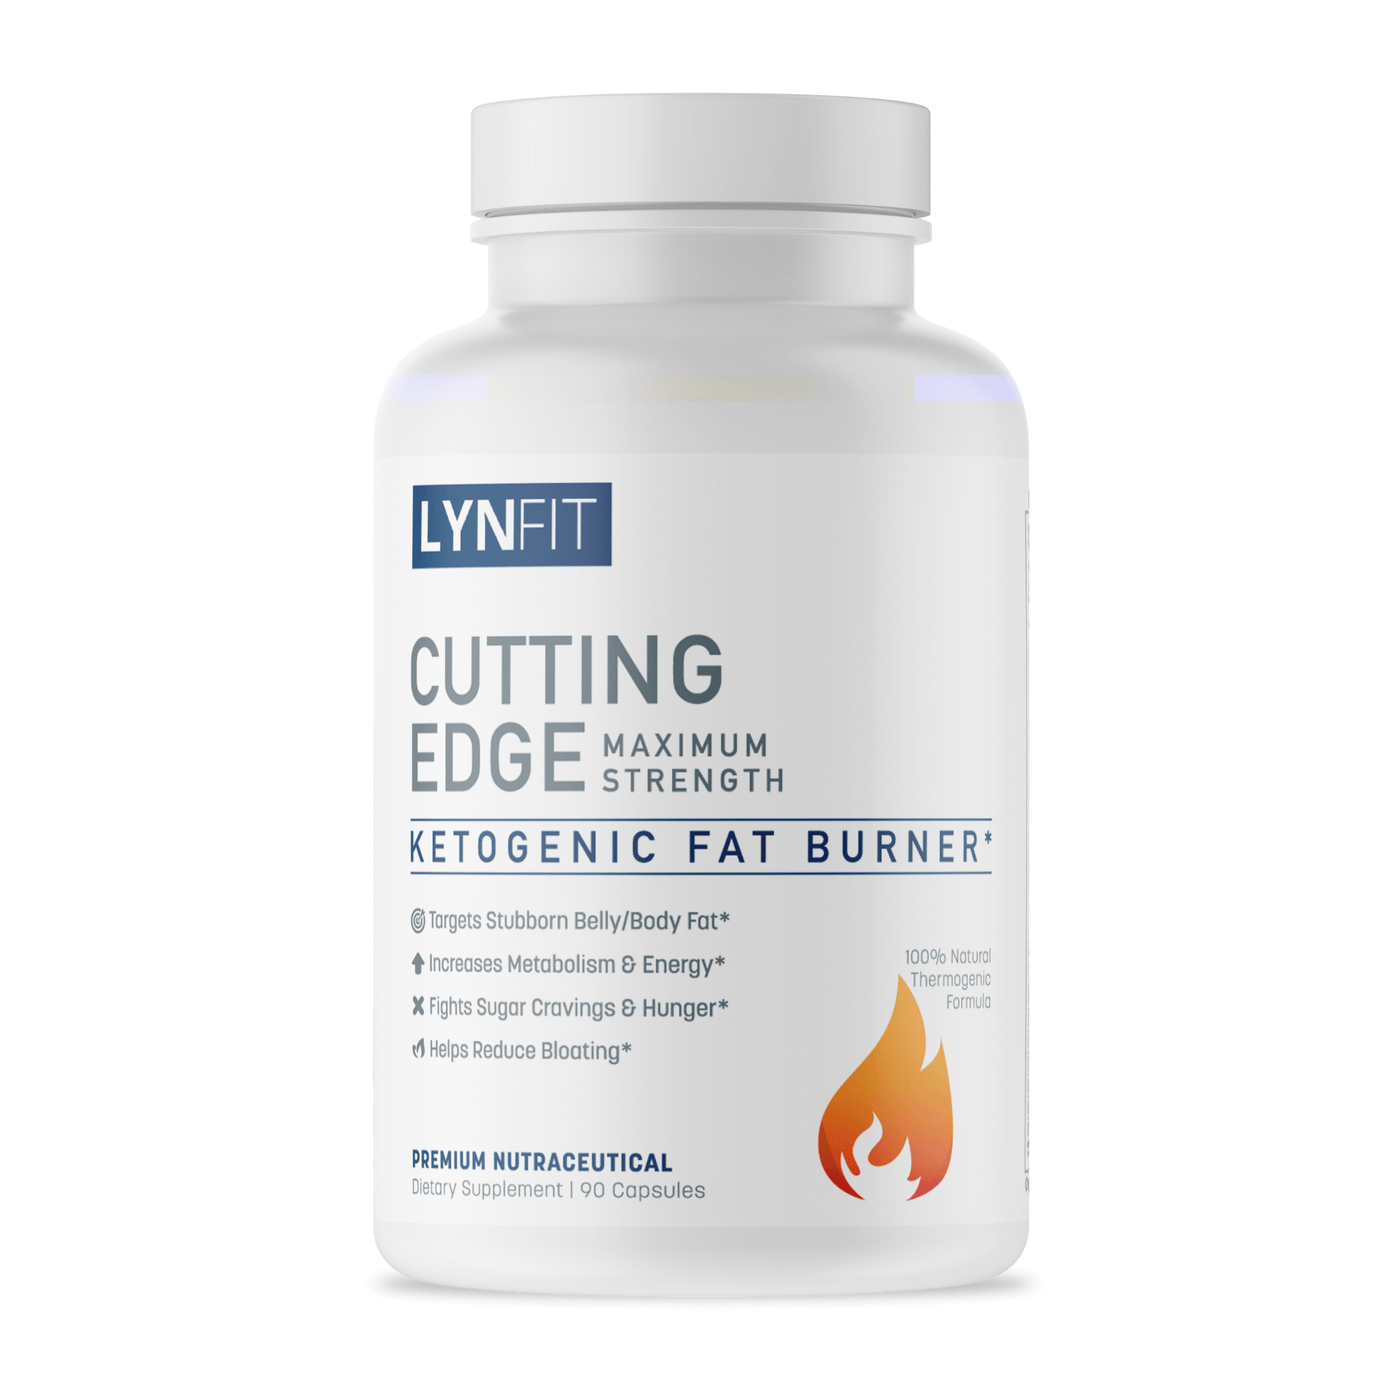 Visceral fat and appetite control